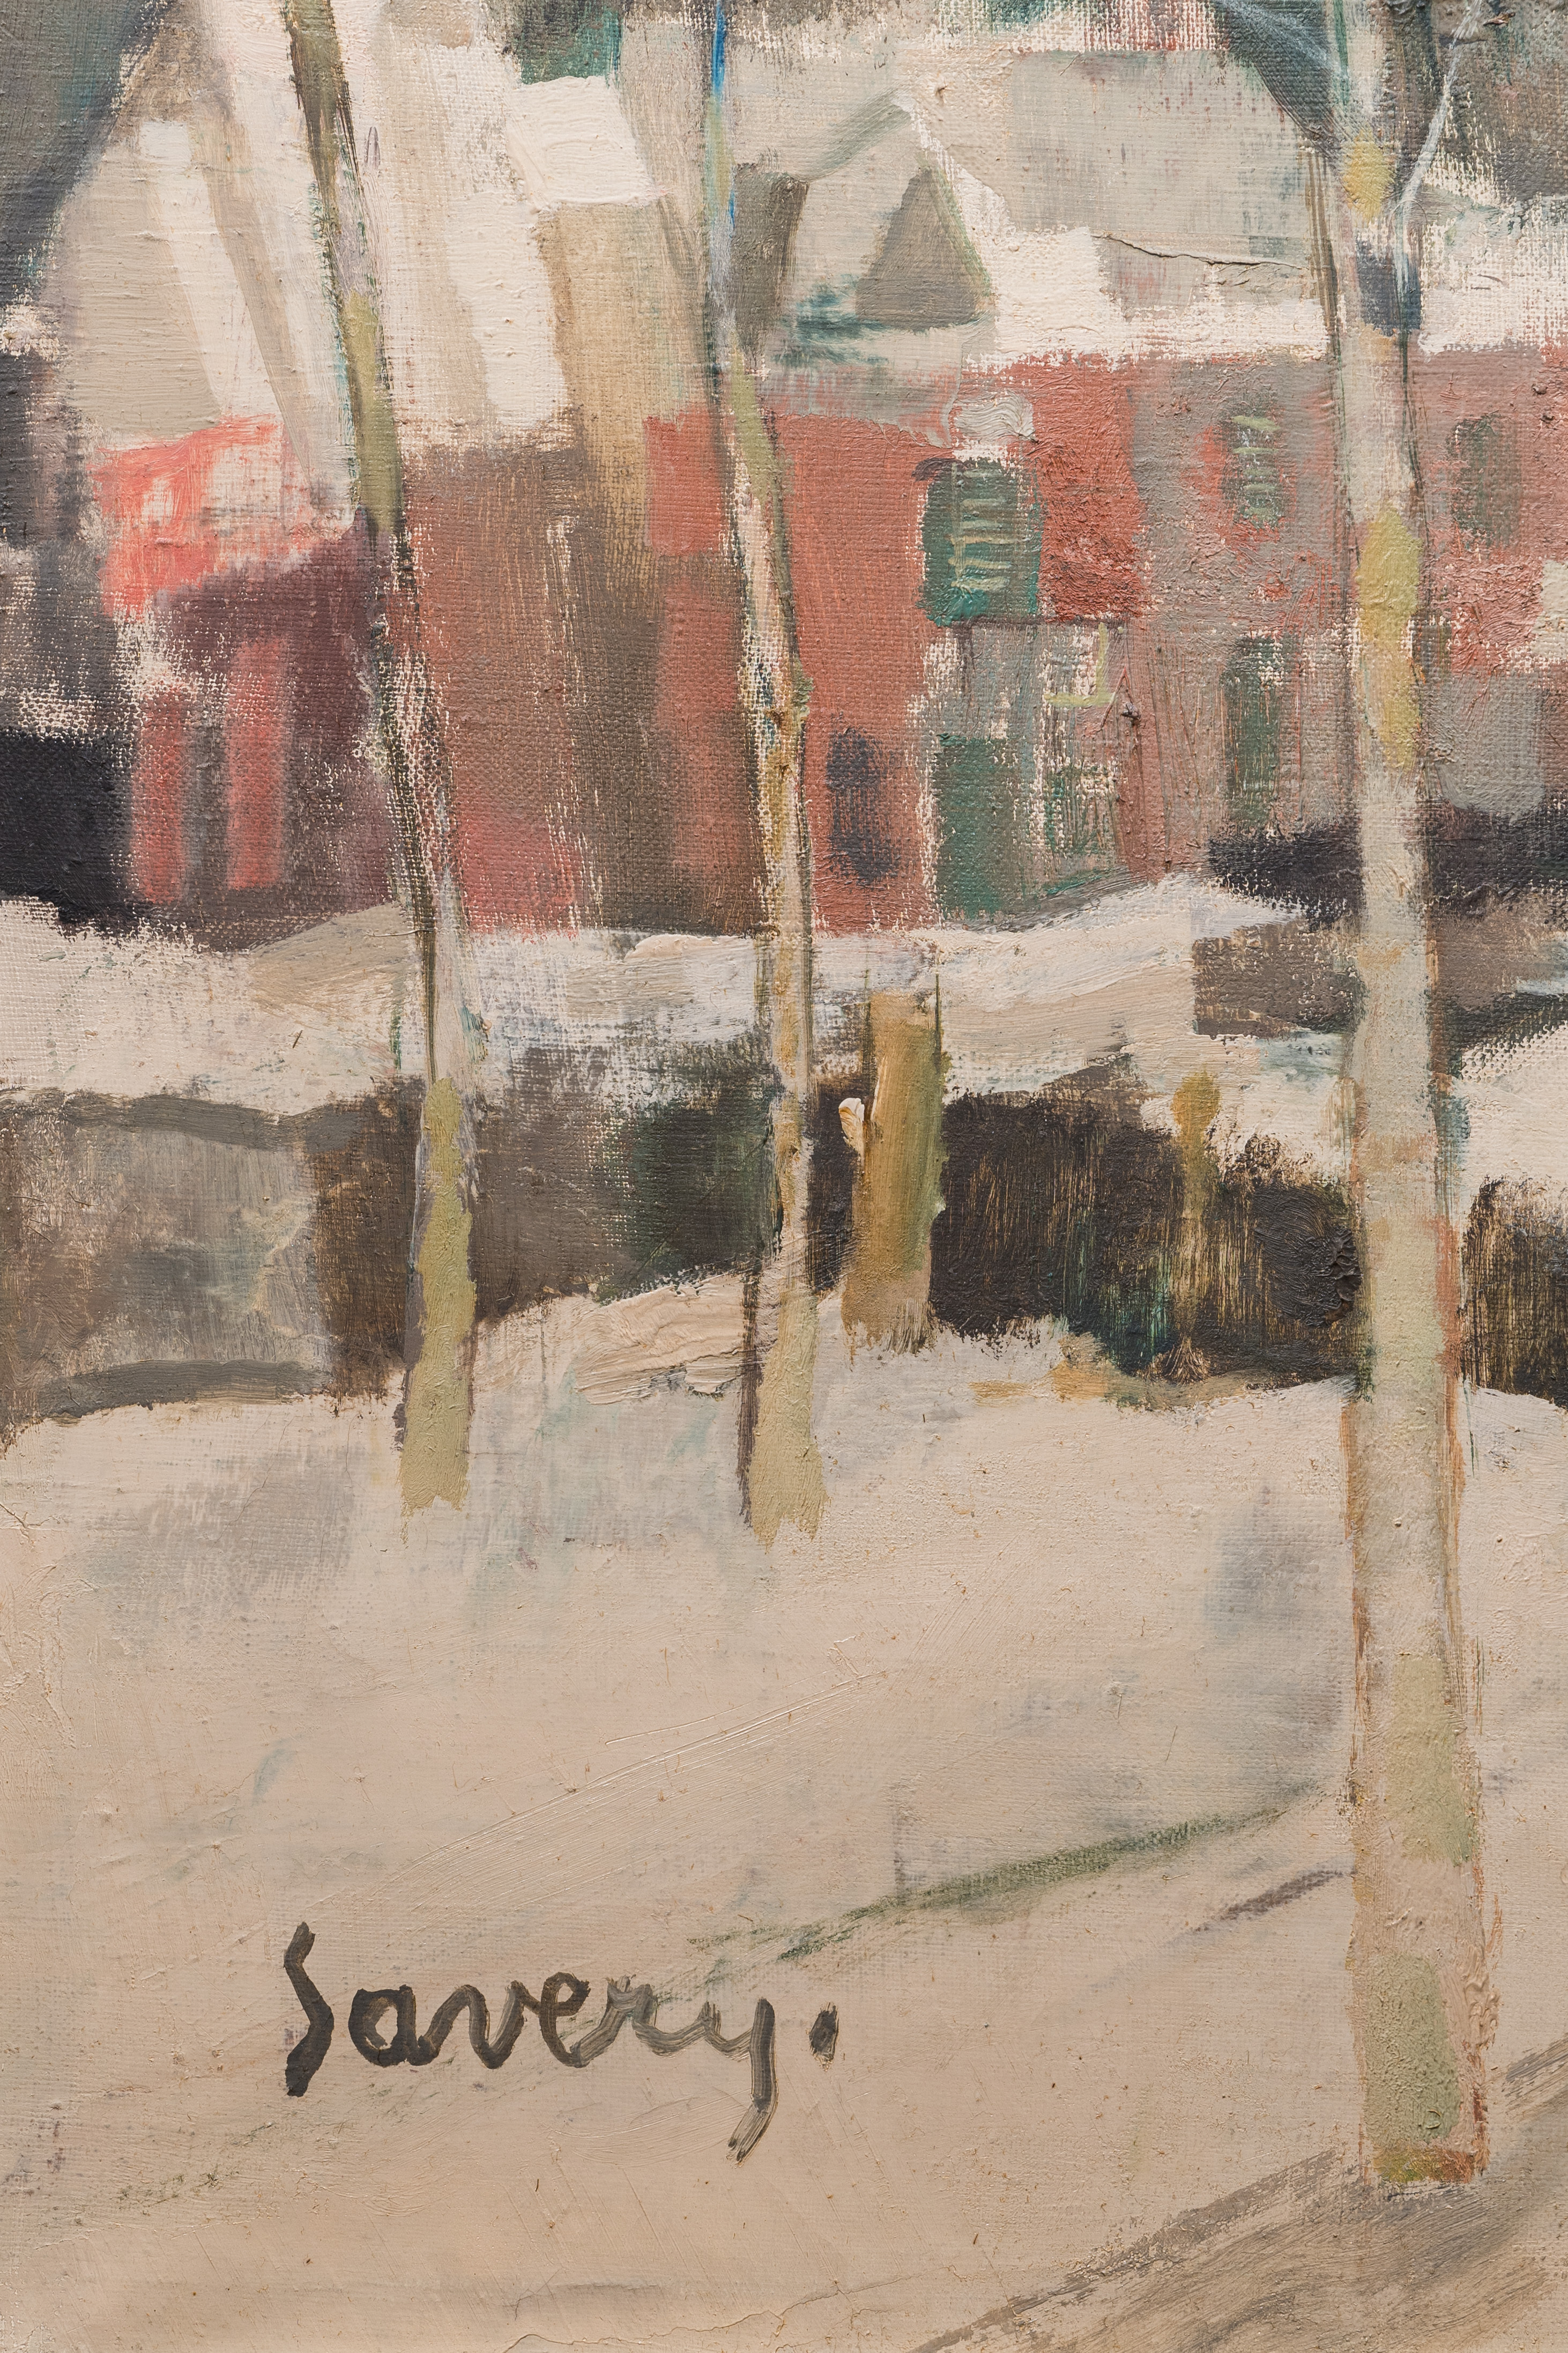 Albert Saverys (1886-1964): Lane in the snow, oil on canvas - Image 4 of 6